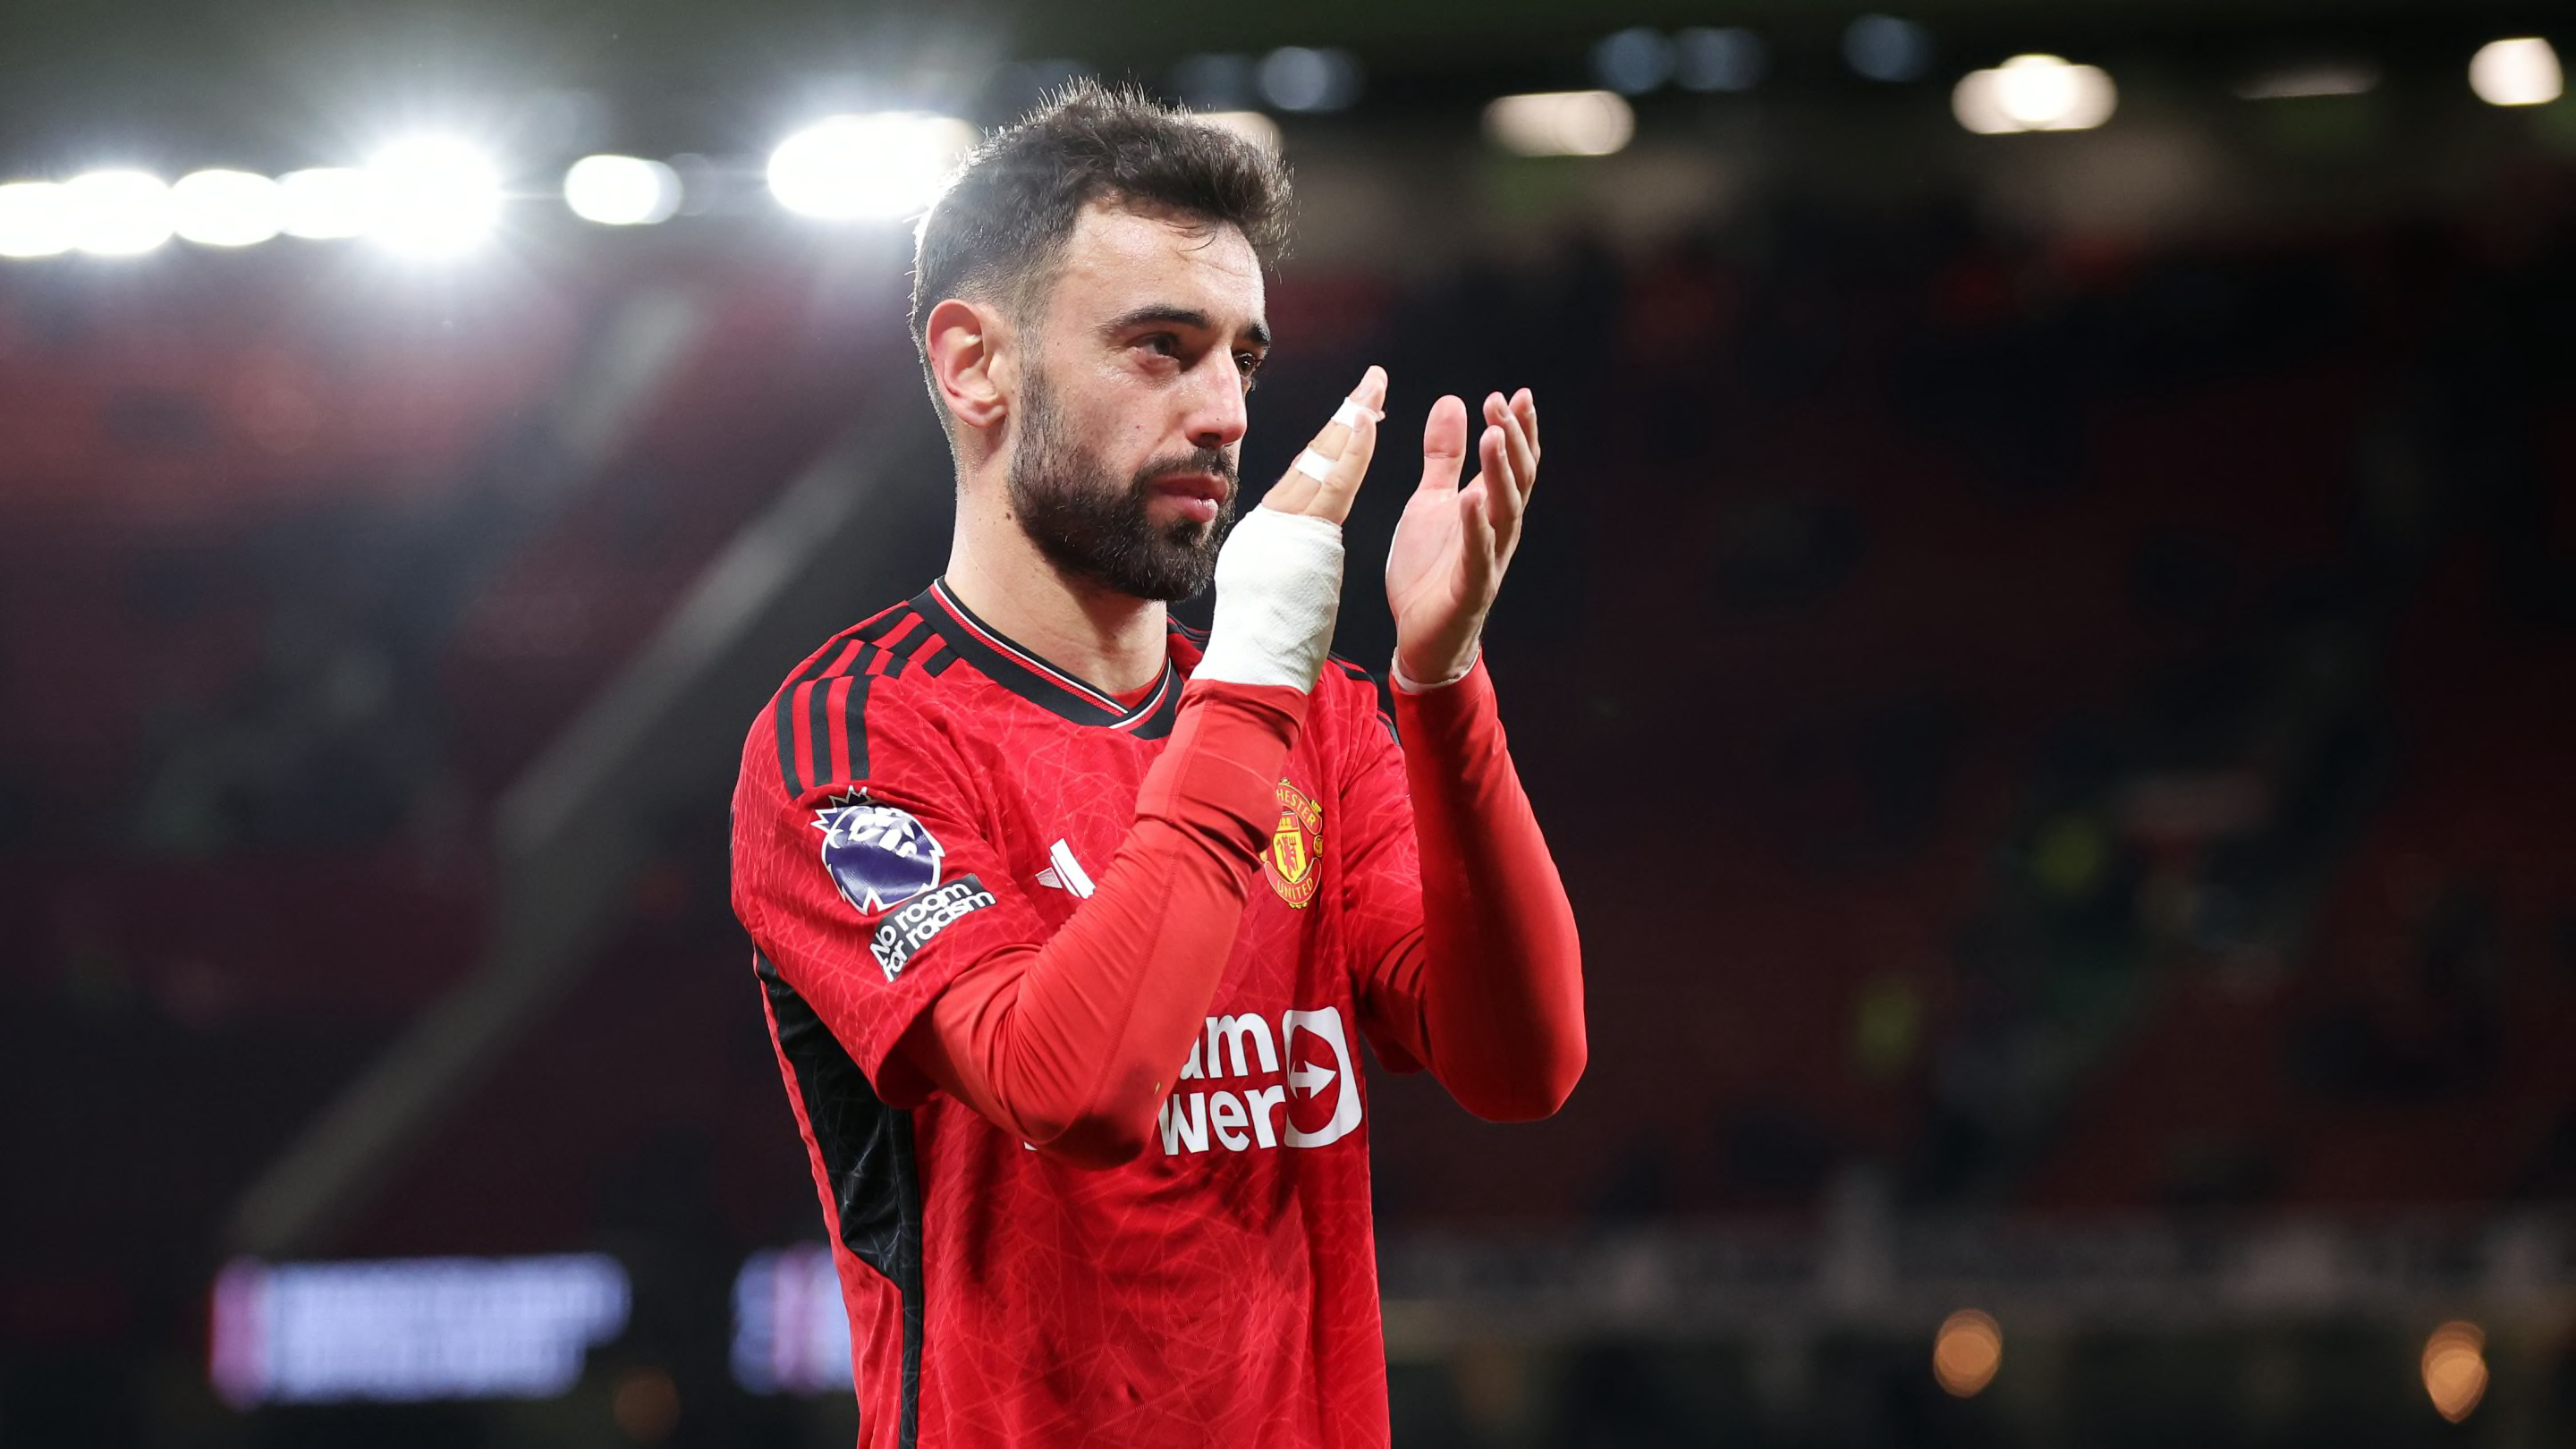 Bruno Fernandes 'insisted' on playing for Man Utd with broken bone